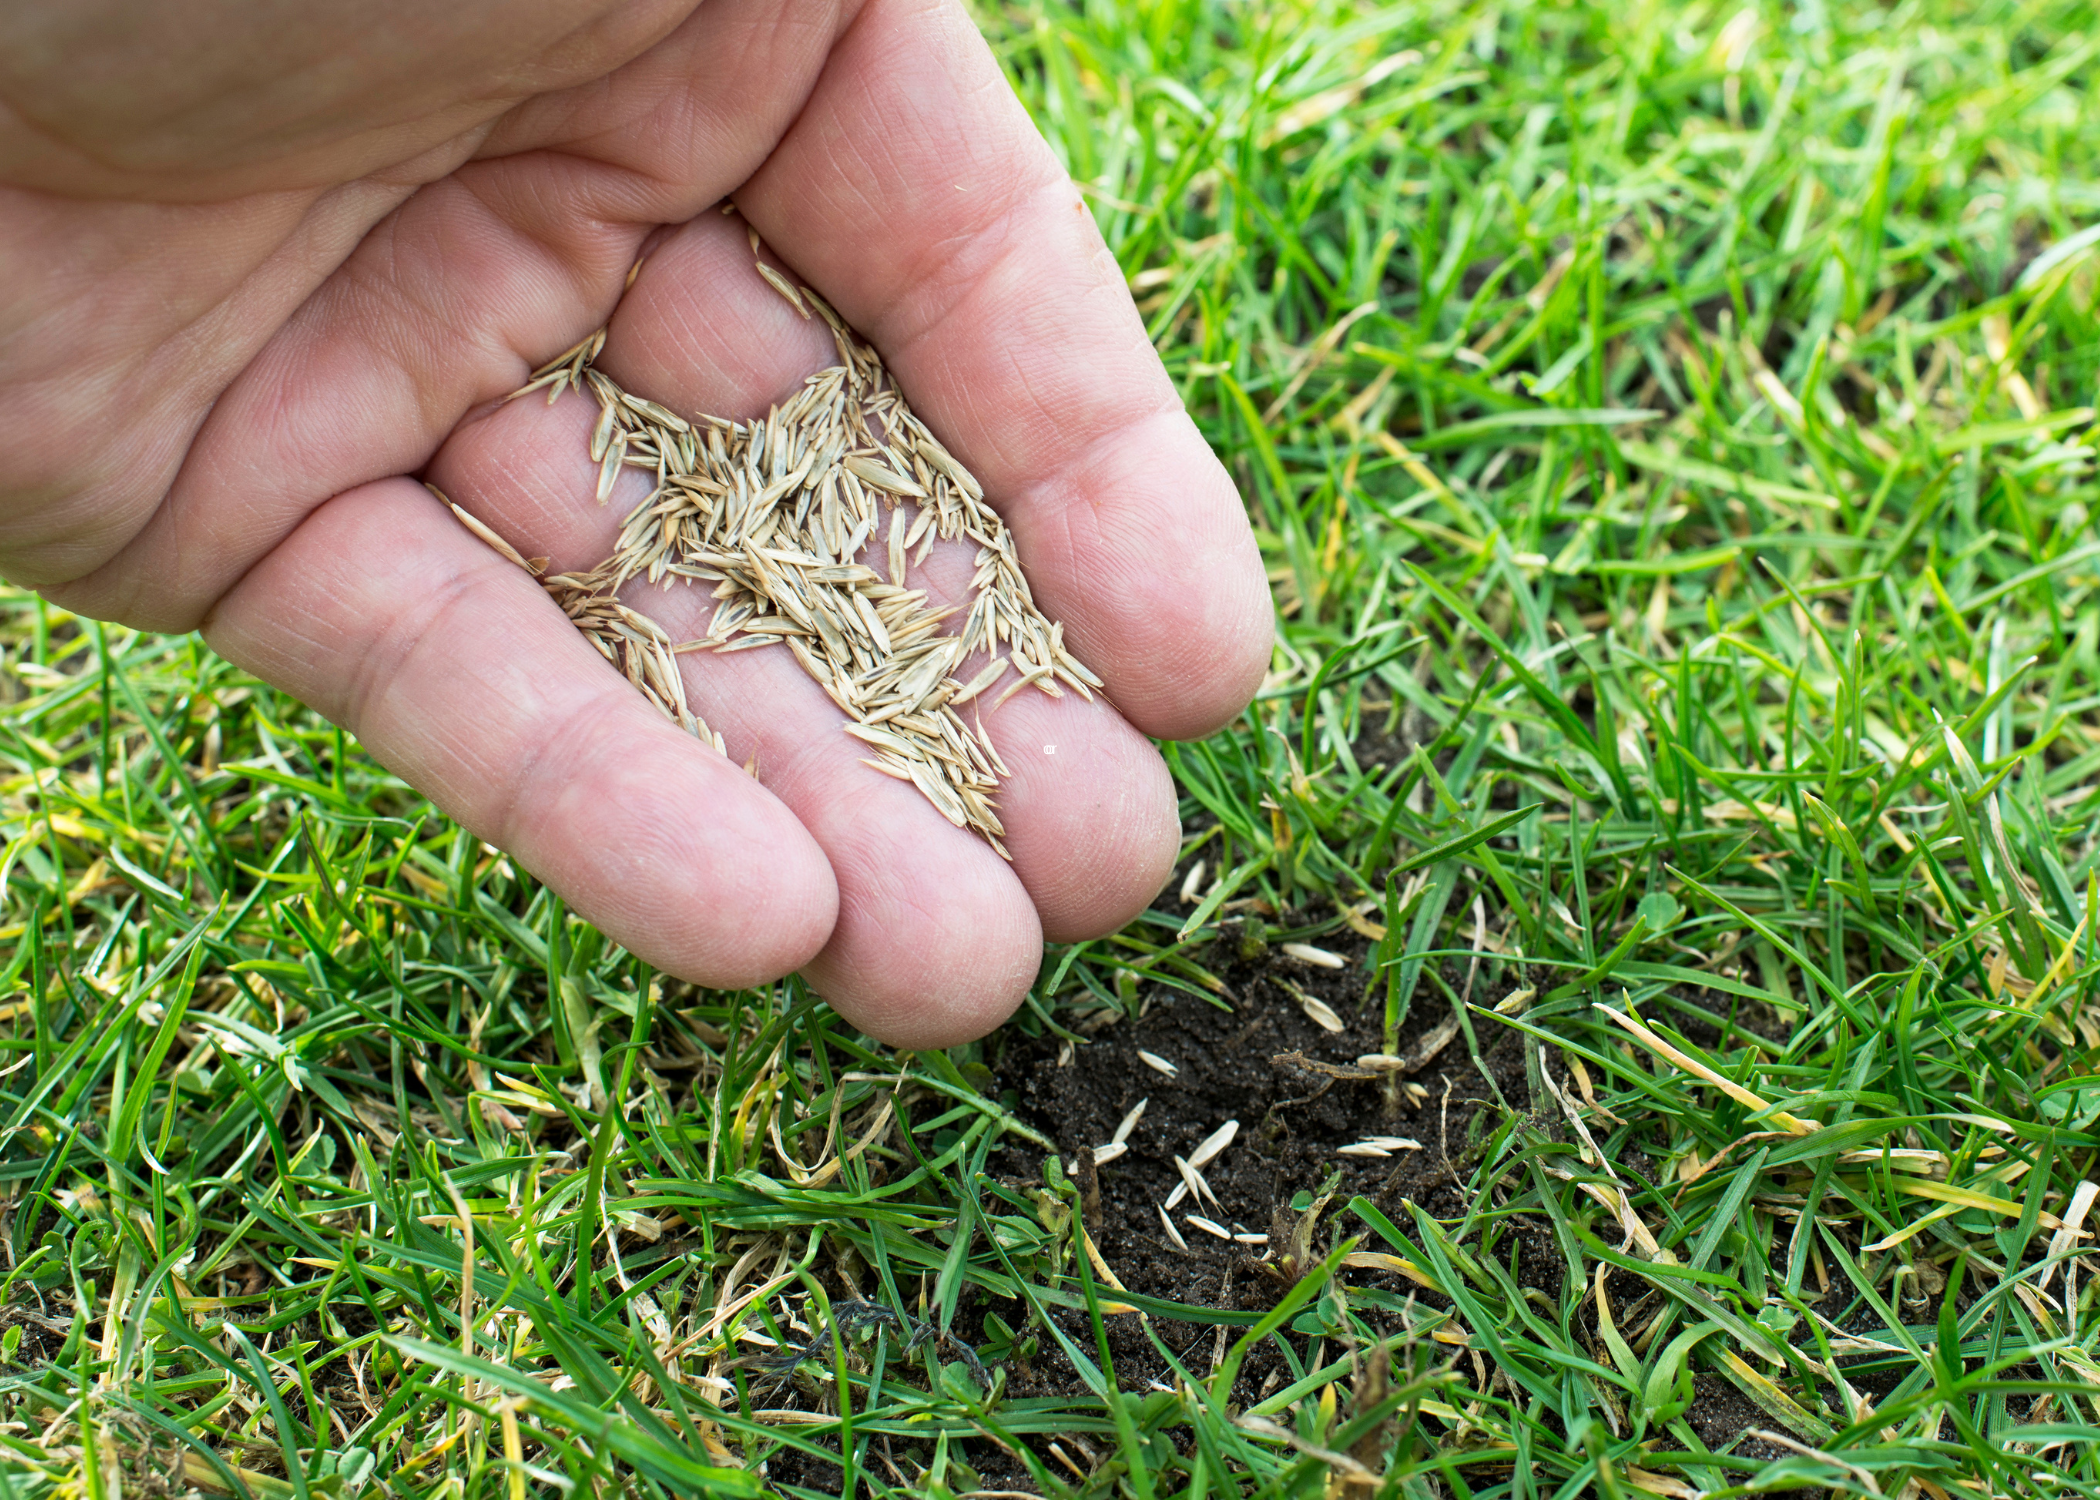 How to Reseed Your Lawn Like a Pro in Just a Few Easy Steps